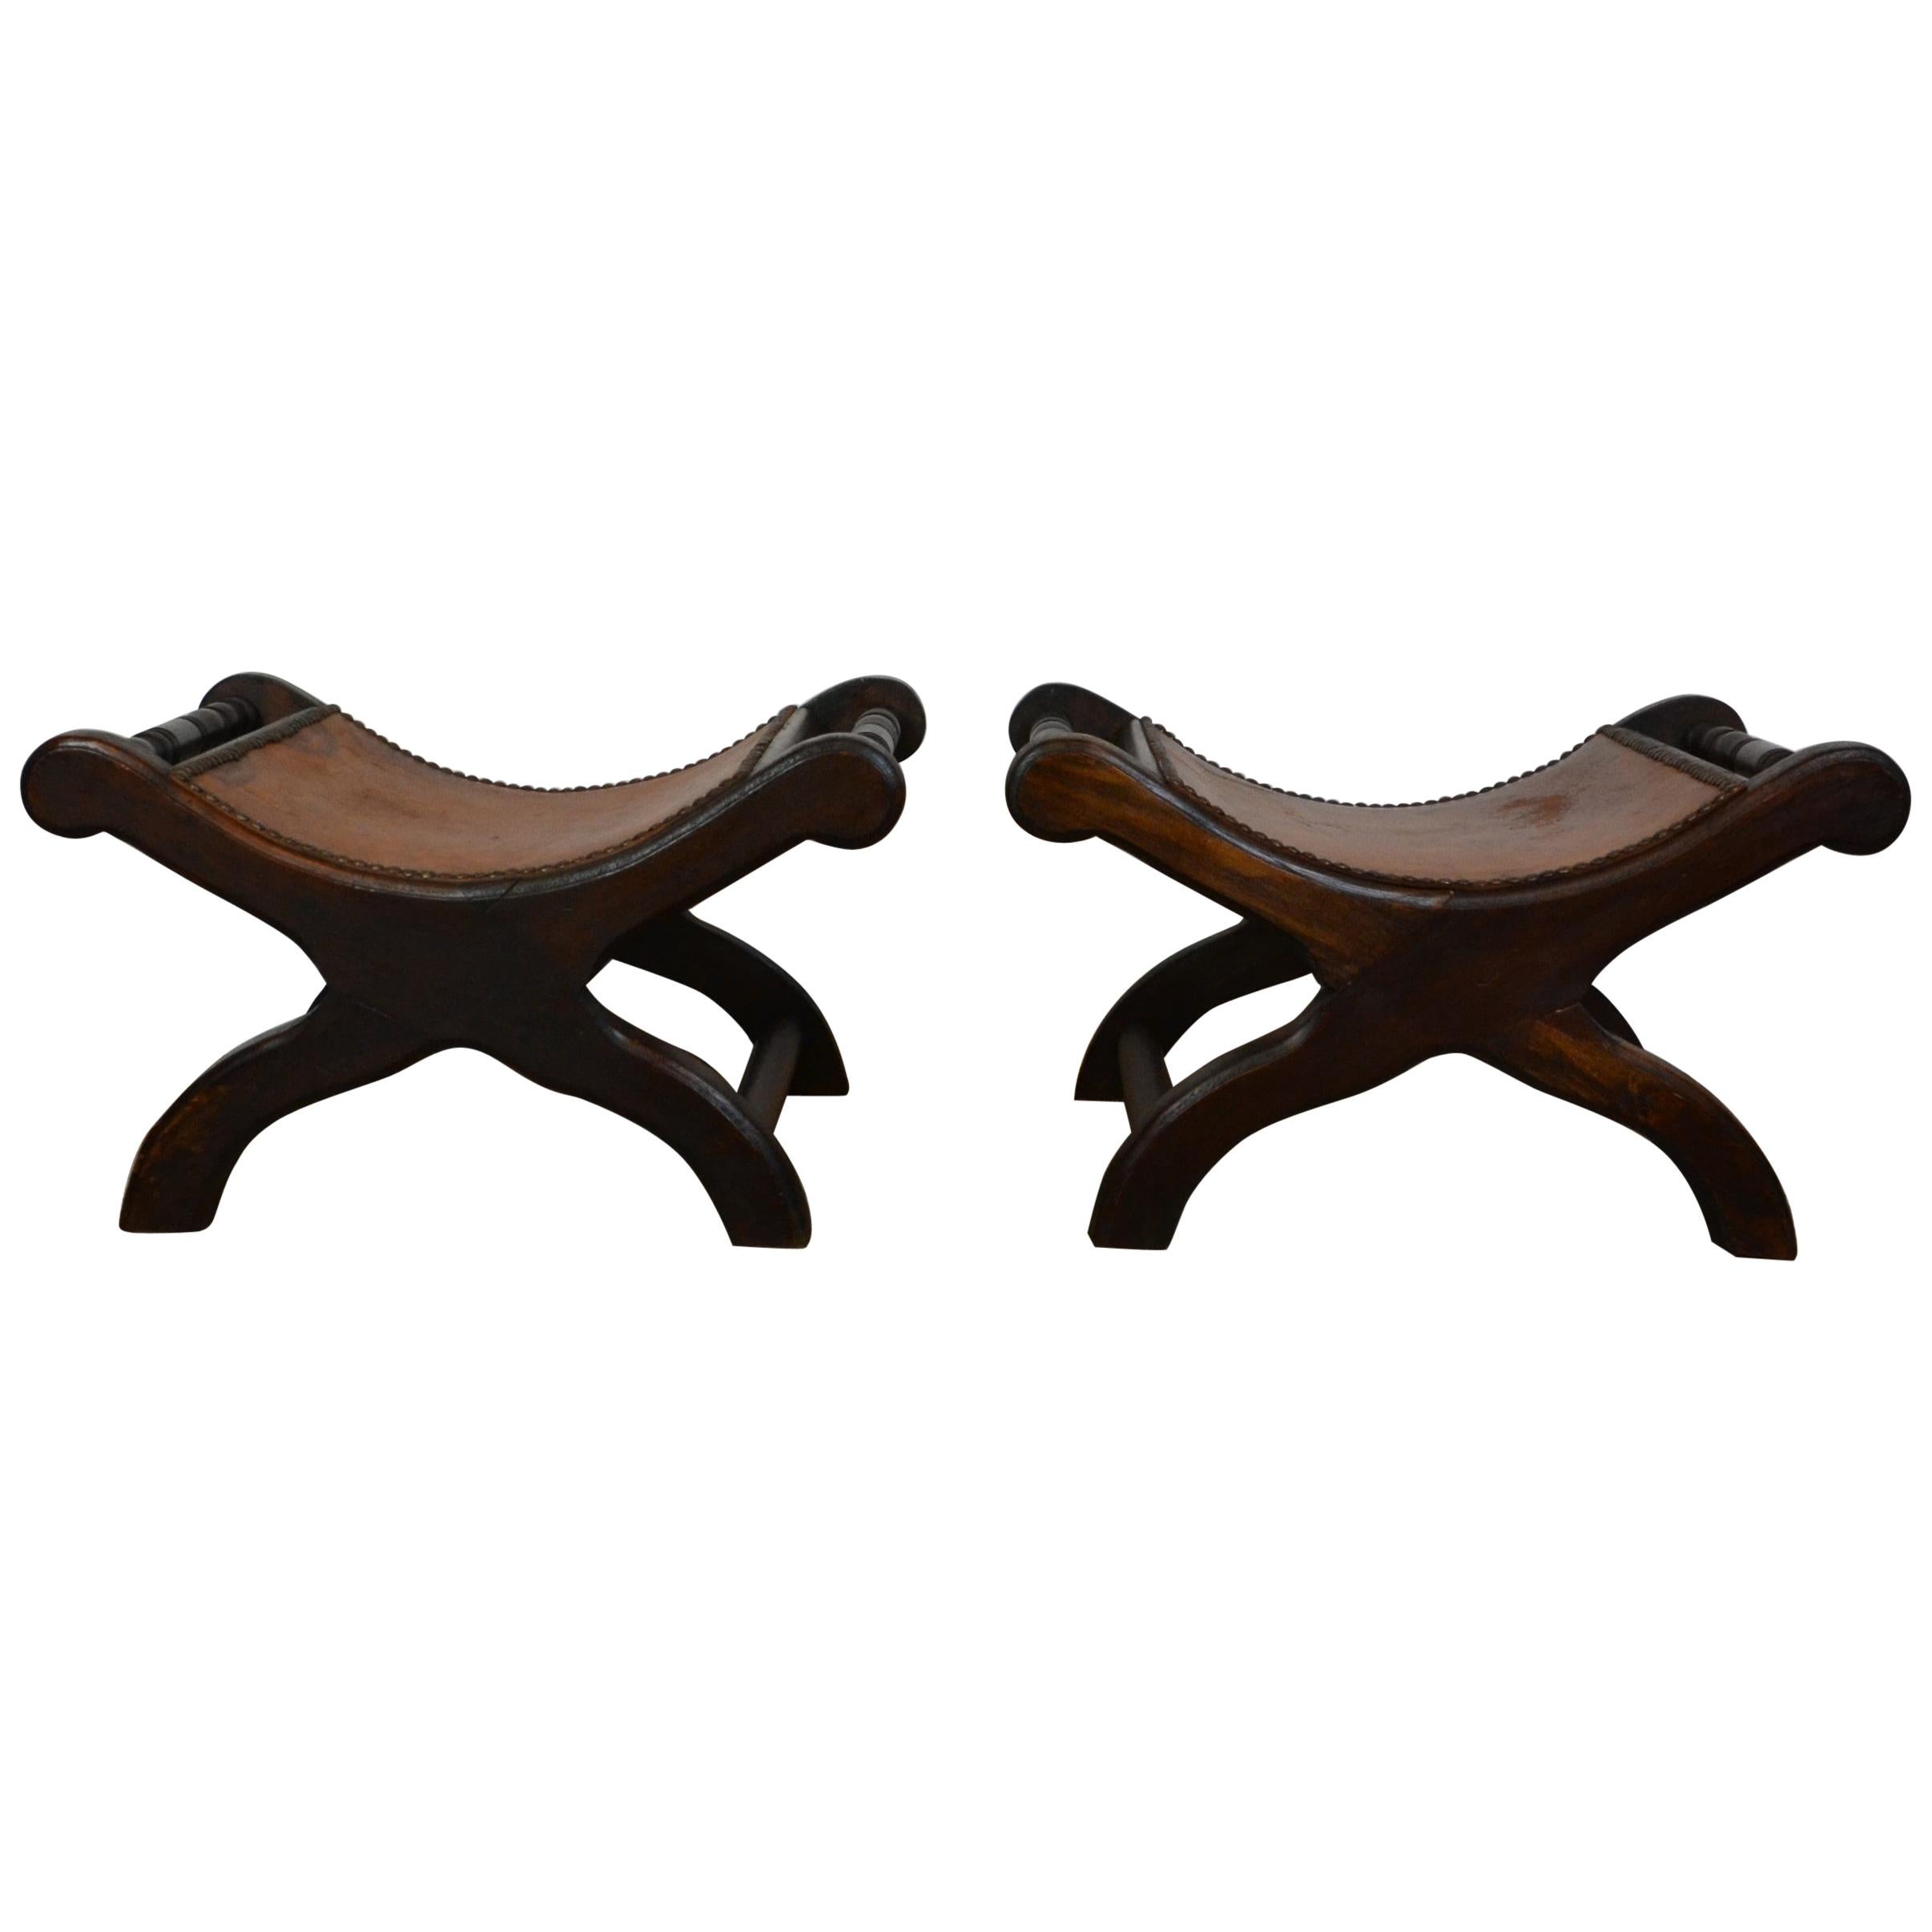 Pair of Leather Top Neoclassical Footstool Style Benches